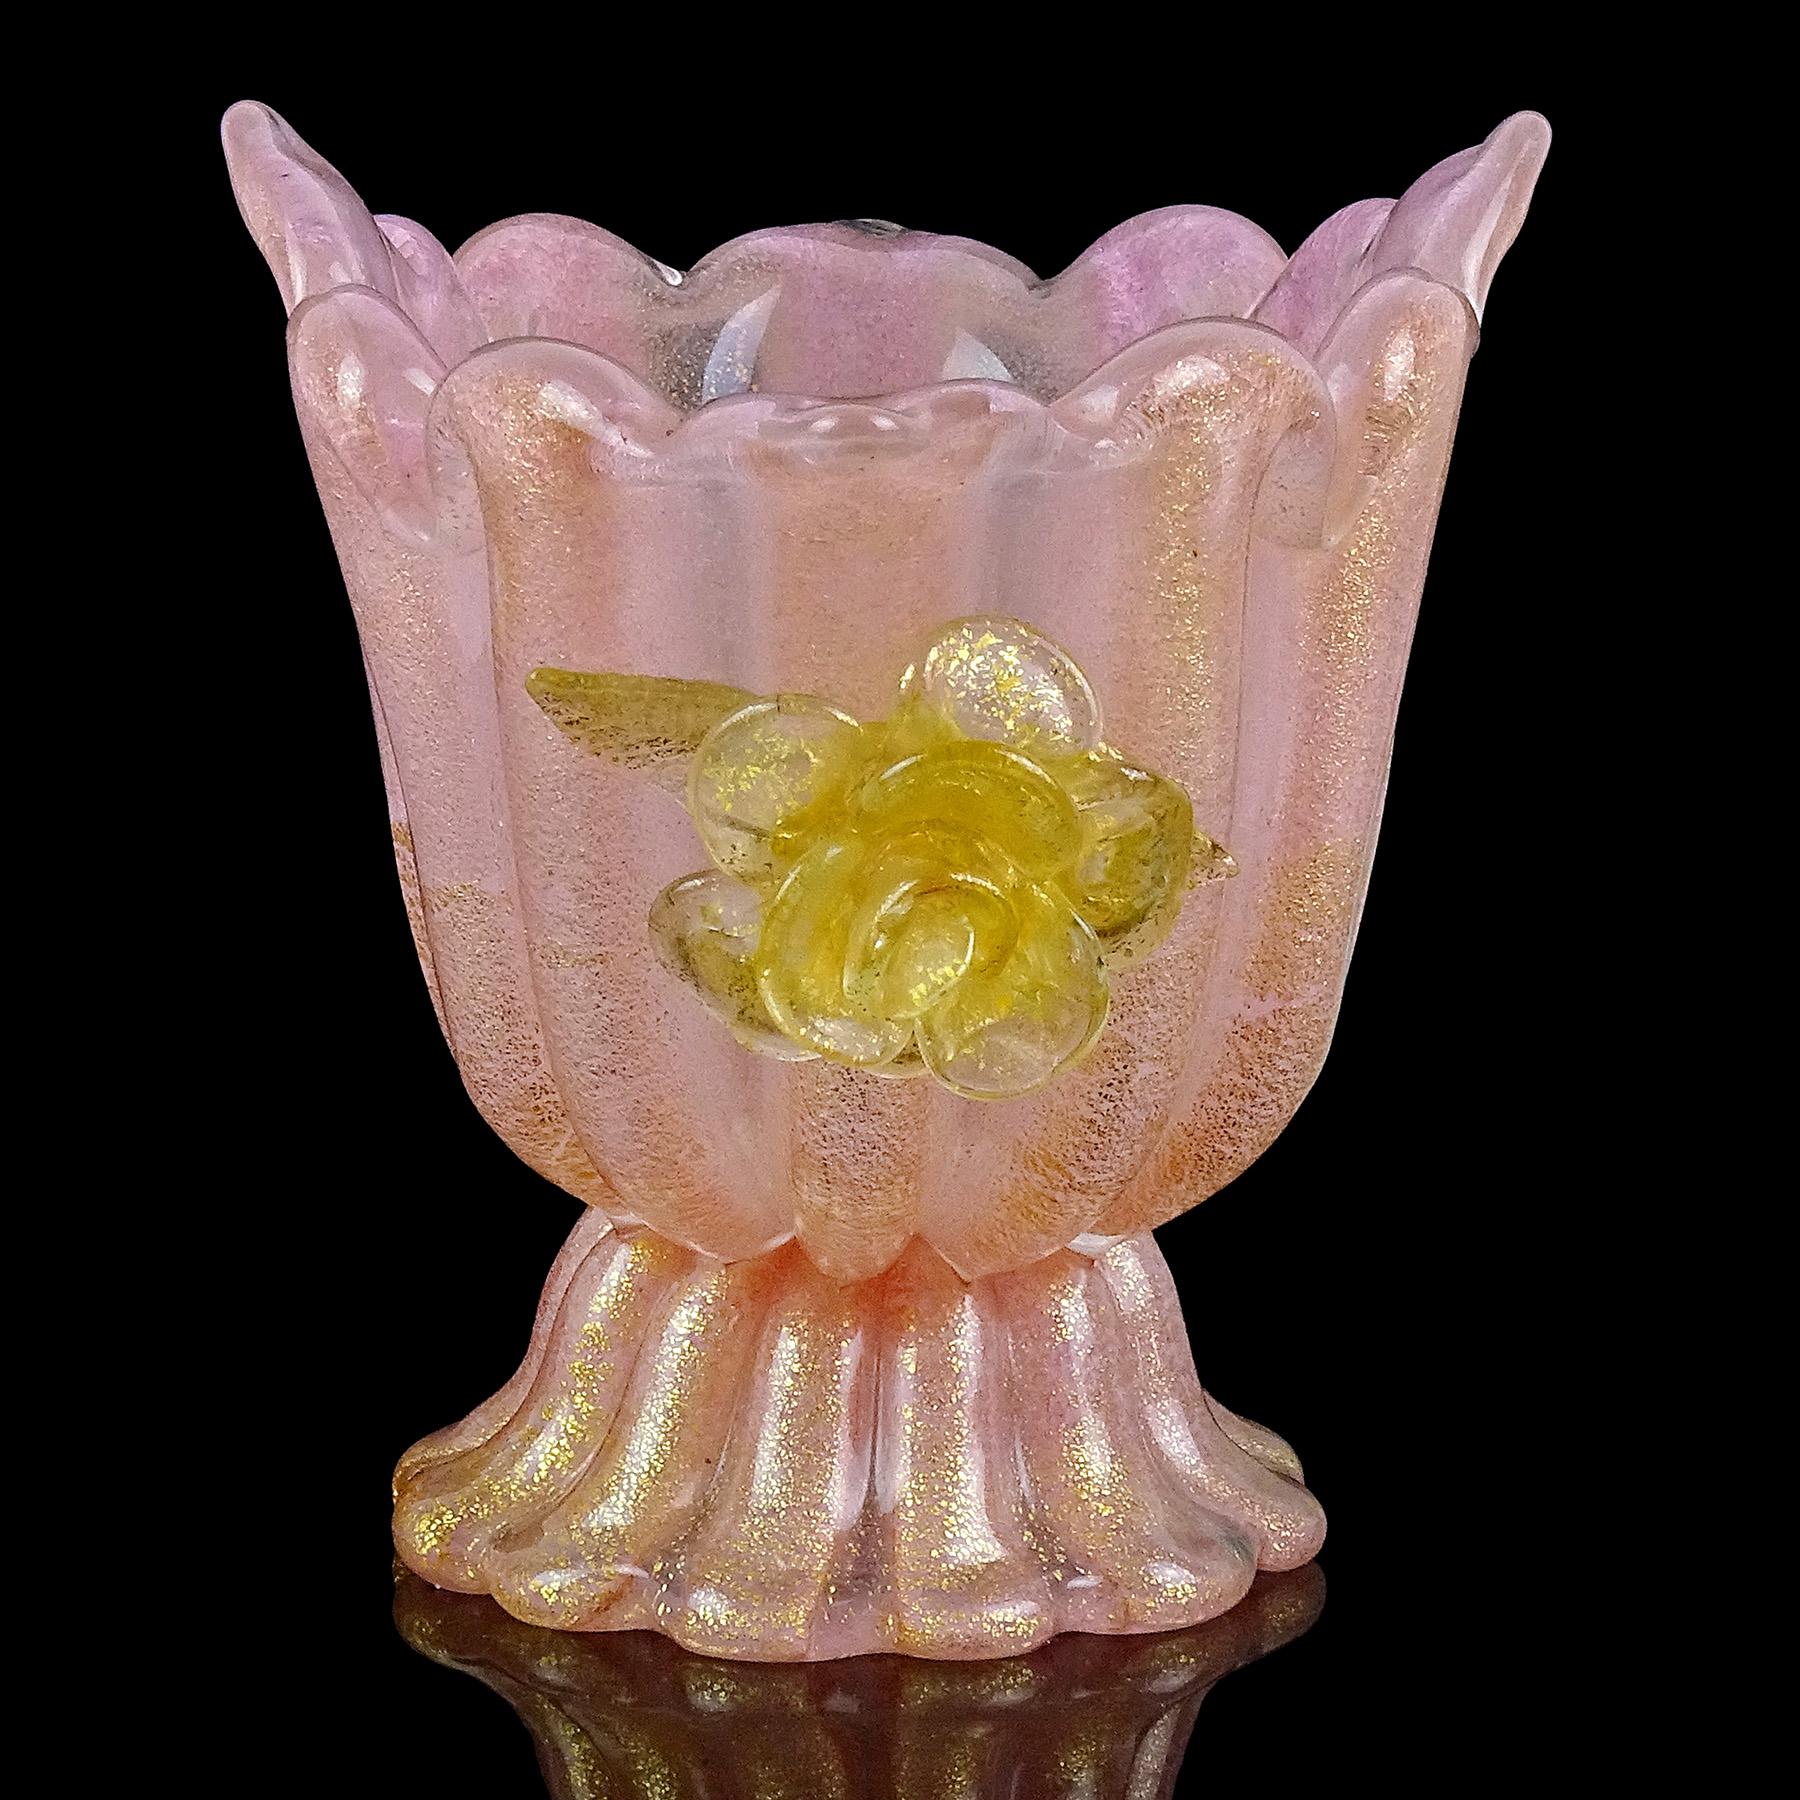 Hand-Crafted Barovier Toso Murano Pink Gold Flecks Flowers Italian Art Glass Compote Bowl